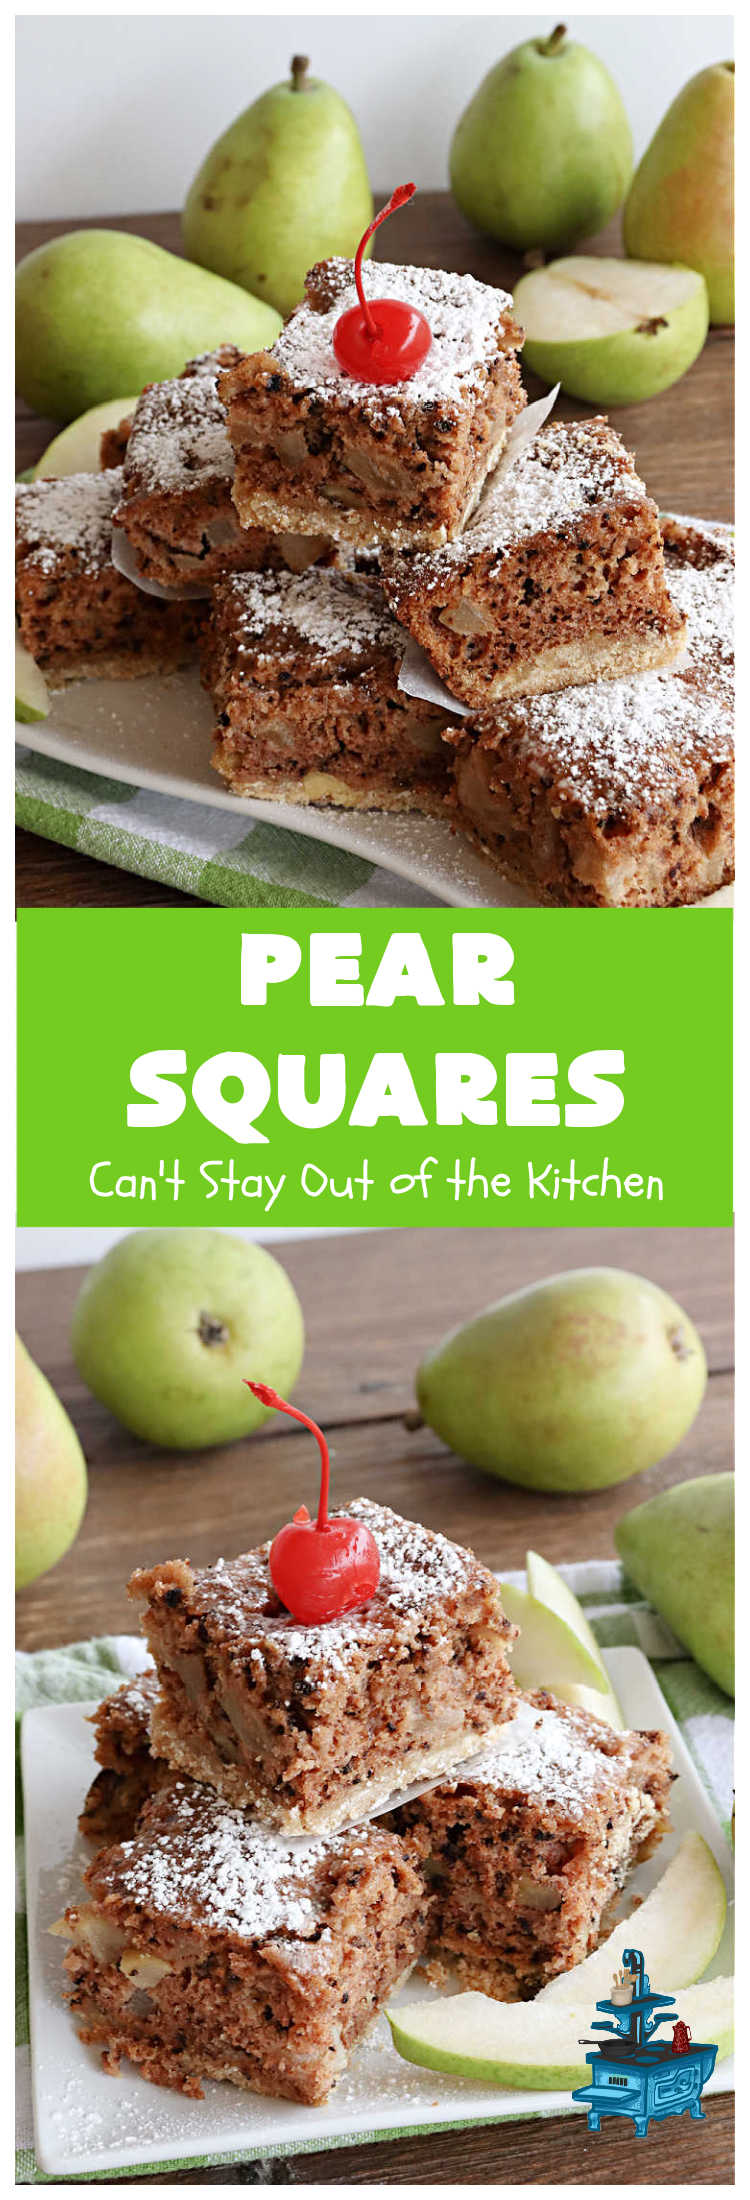 Pear Squares | Can't Stay Out of the Kitchen | these delicious cake-type #cookies are moist, nutty and filled with #pears, #cinnamon & #nutmeg. Wonderful #dessert any time you have company & for #holidays like #Easter, #MothersDay or #FathersDay. Every bite is mouthwatering & delicious. #PearSquares